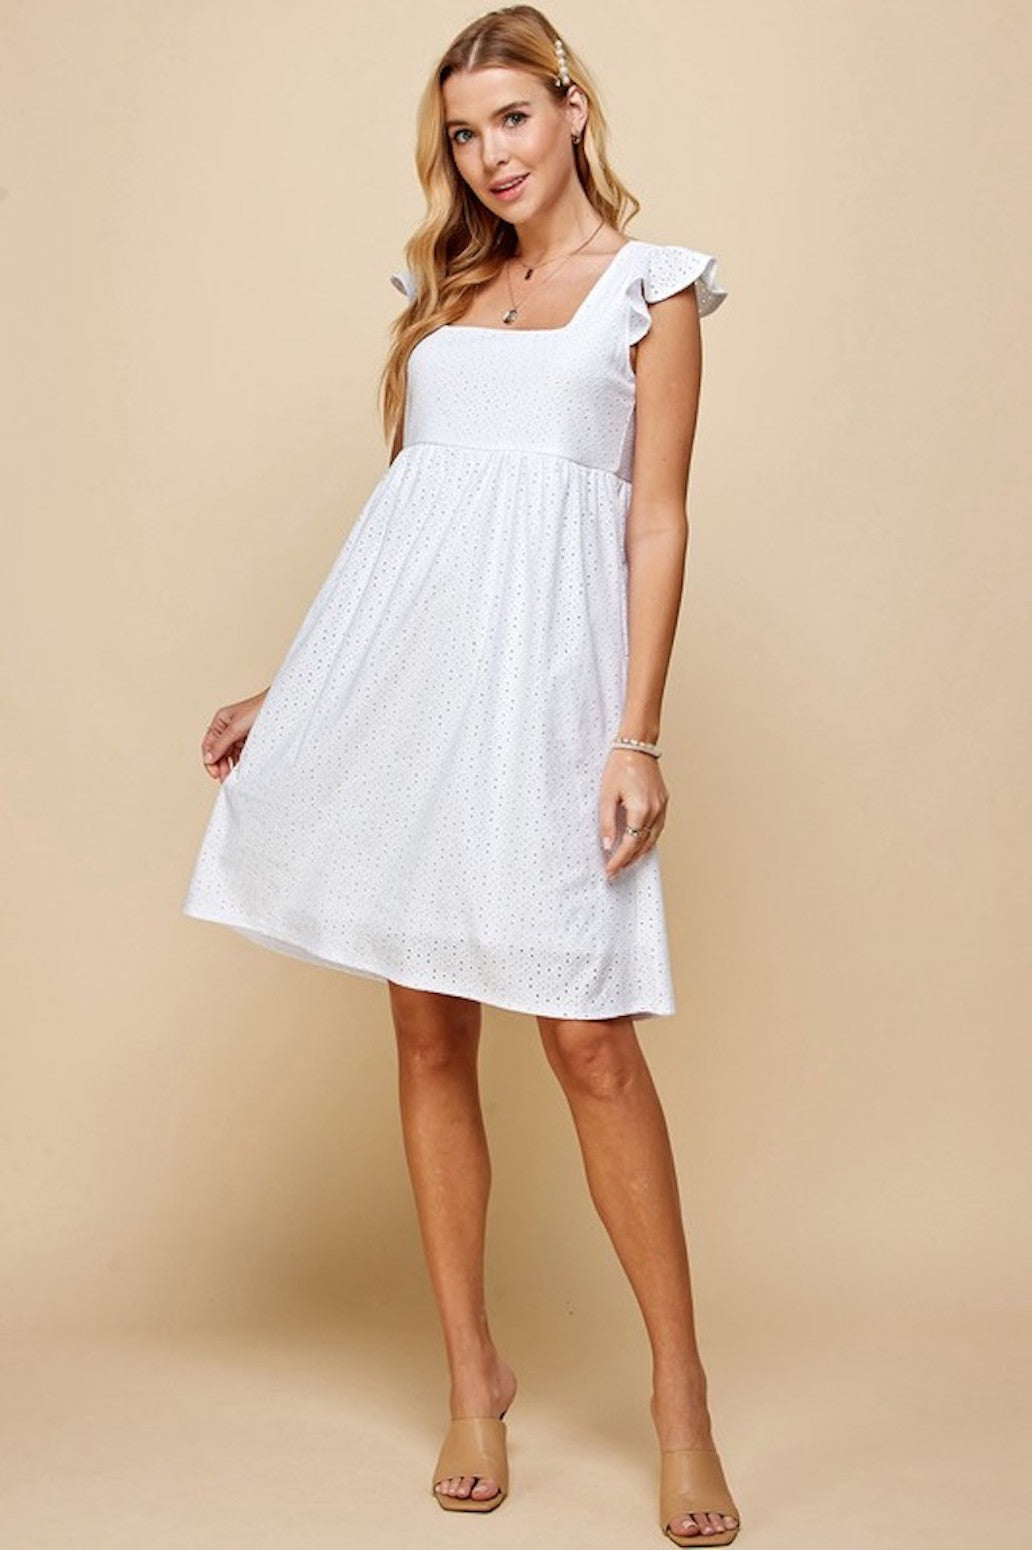 Long Beach Ca boutique fashion style dresses for summer